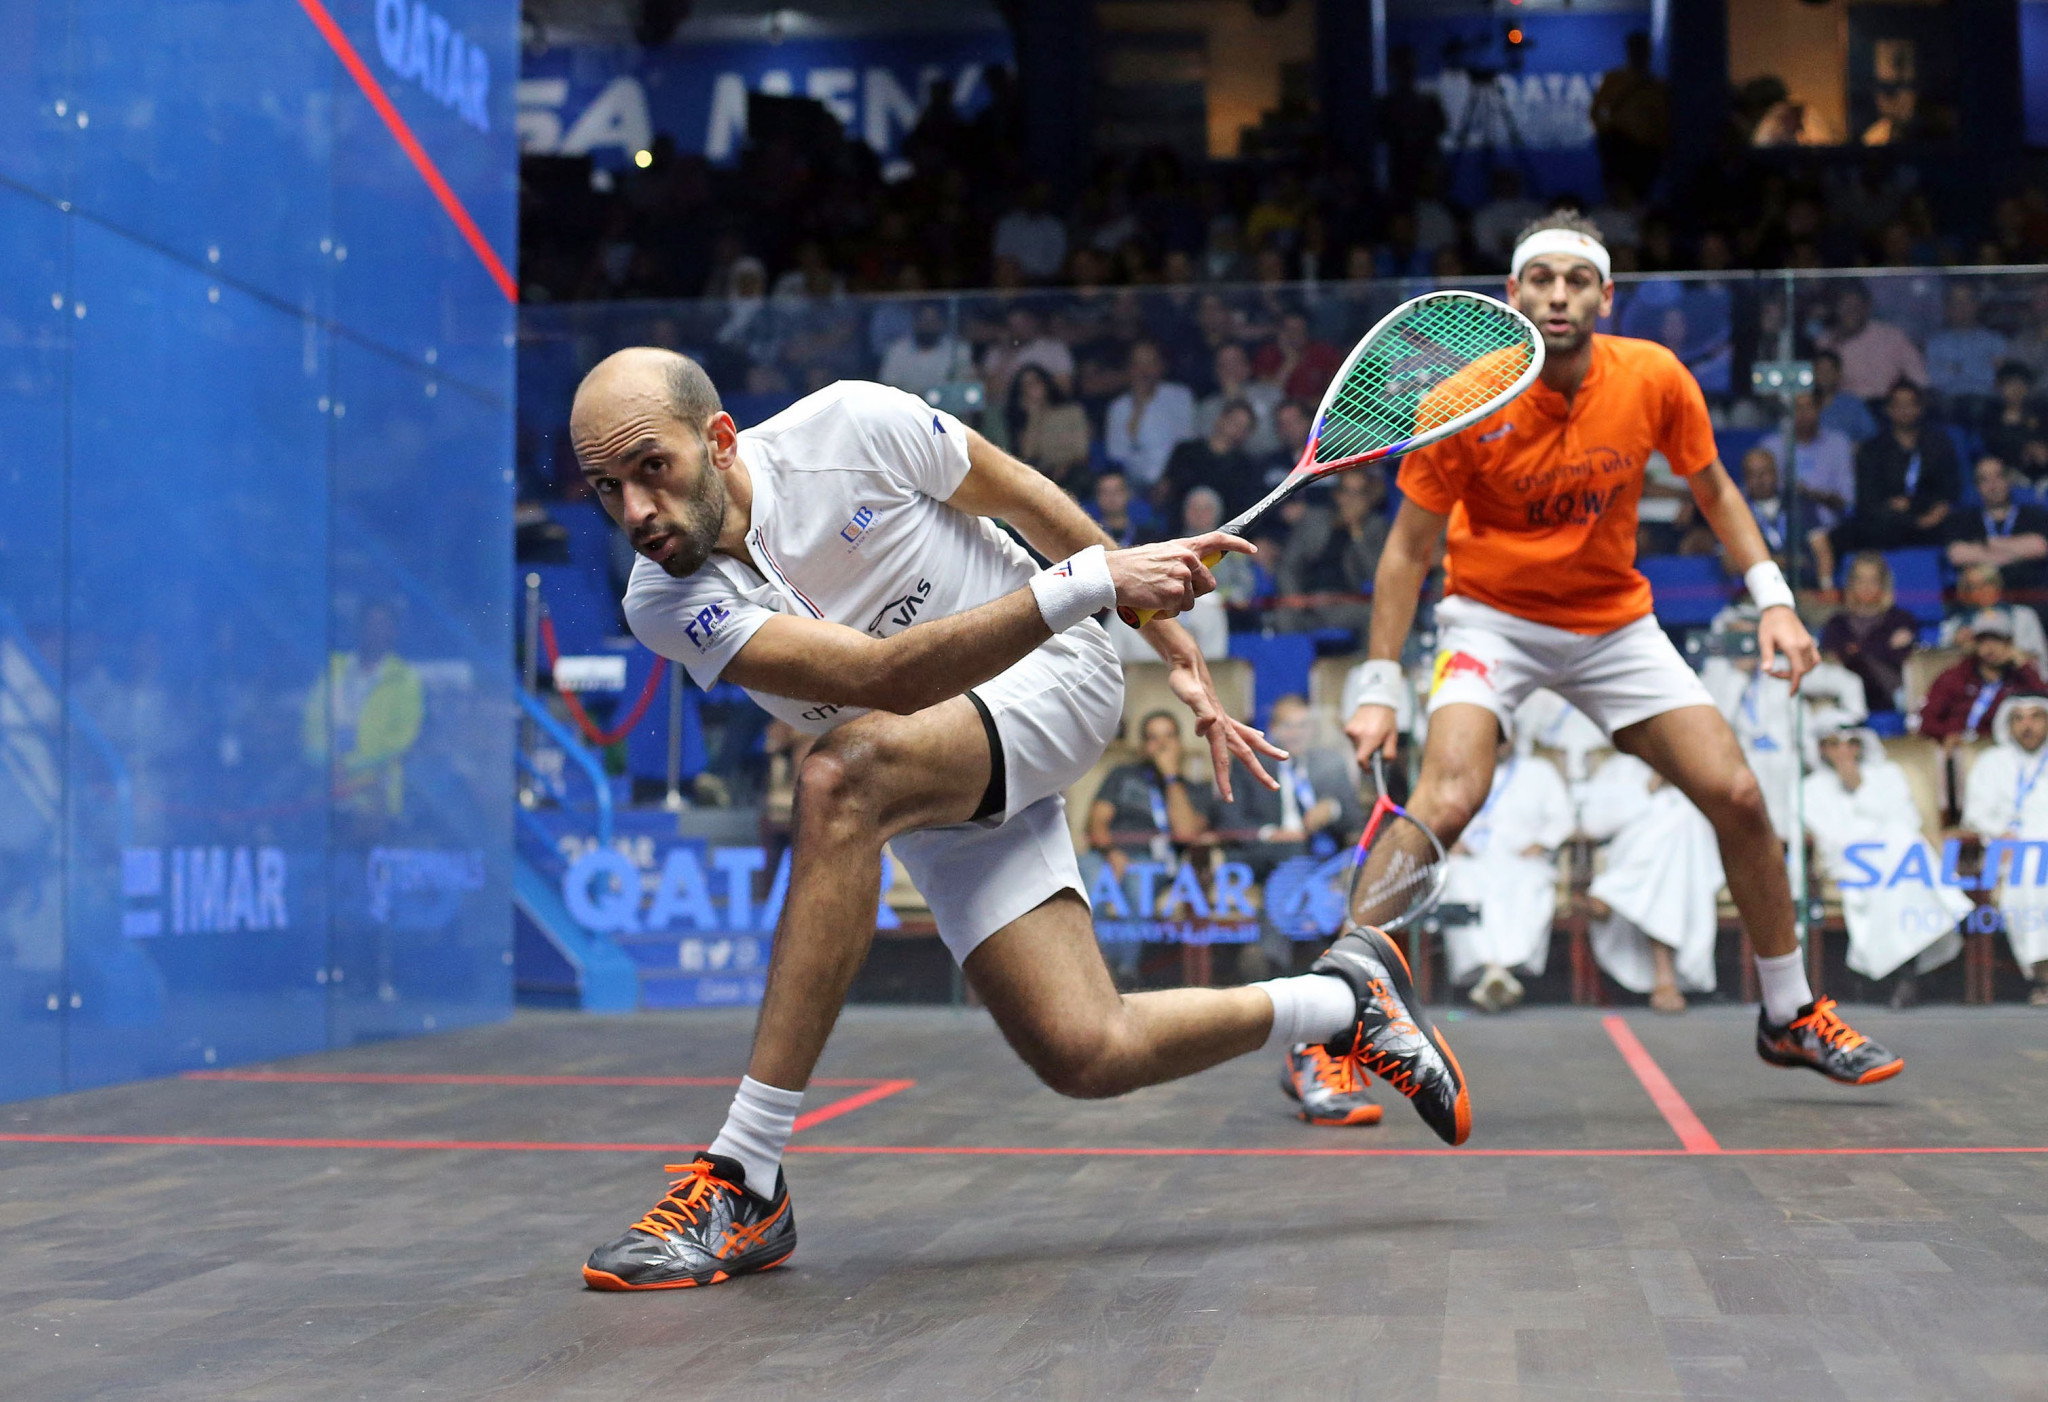 Marwan ElShorbagy progressed to the semi-finals at his brother's expense ©PSA